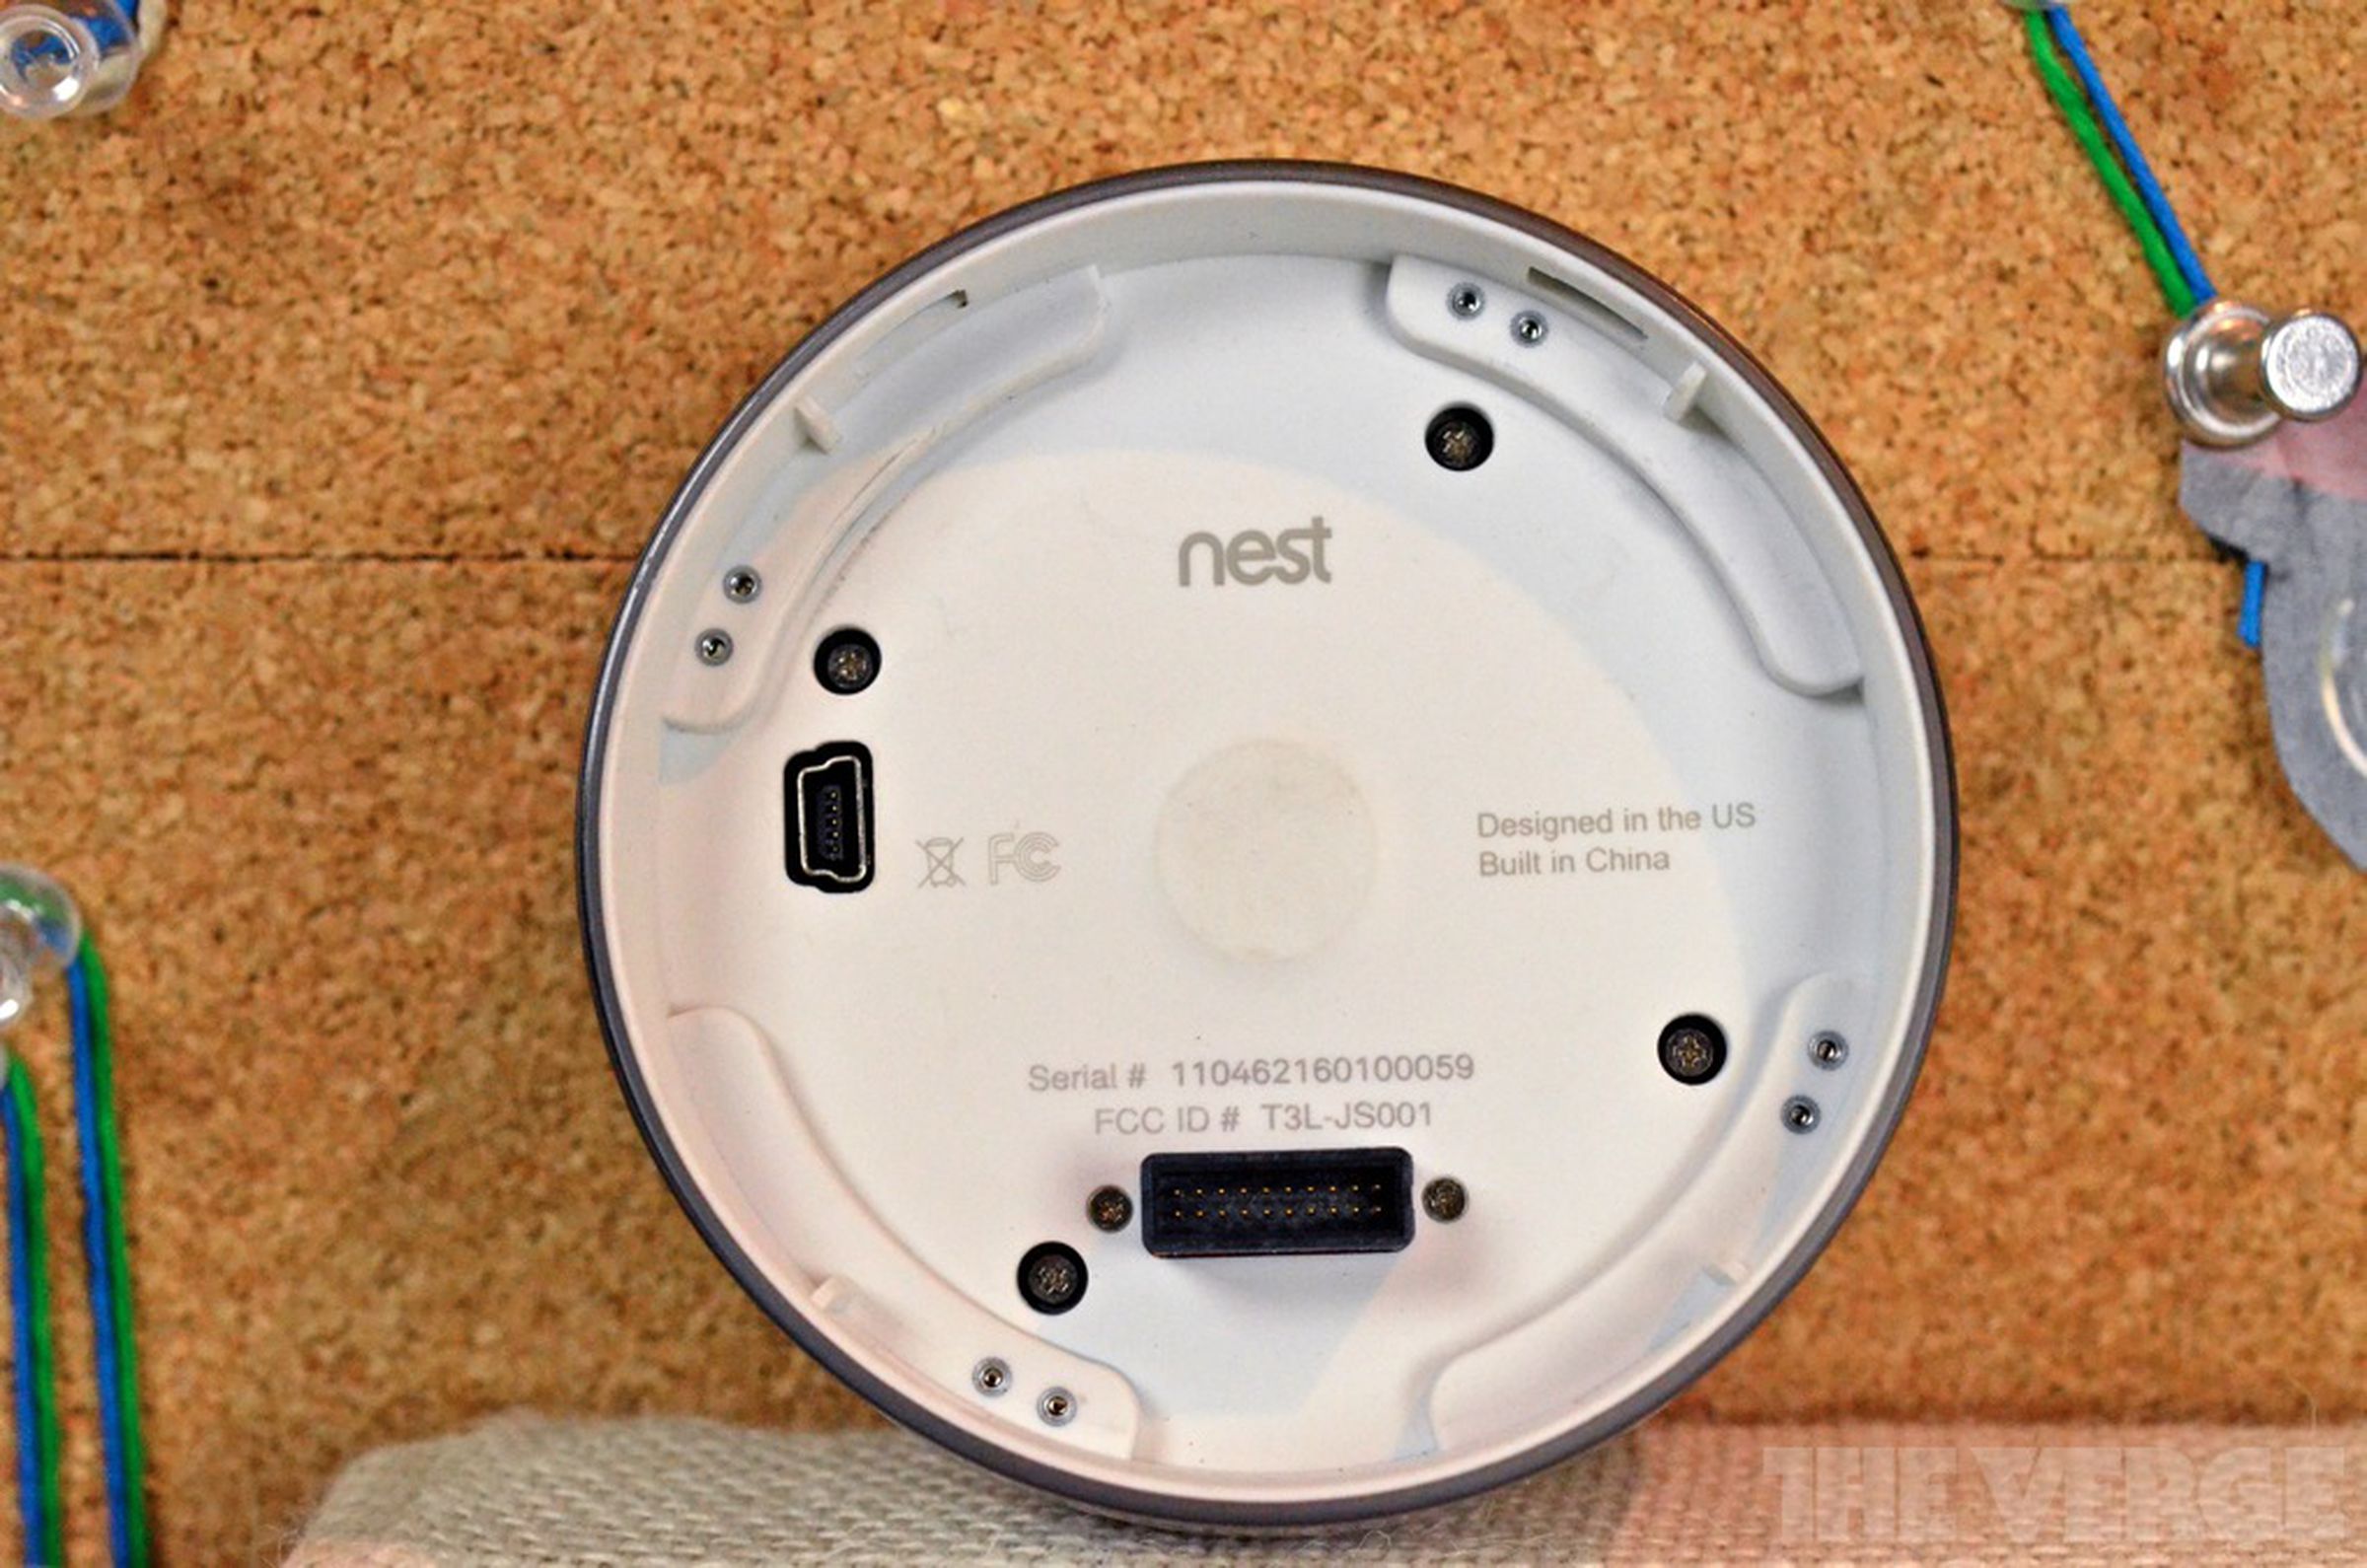 Nest Learning Thermostat hands-on